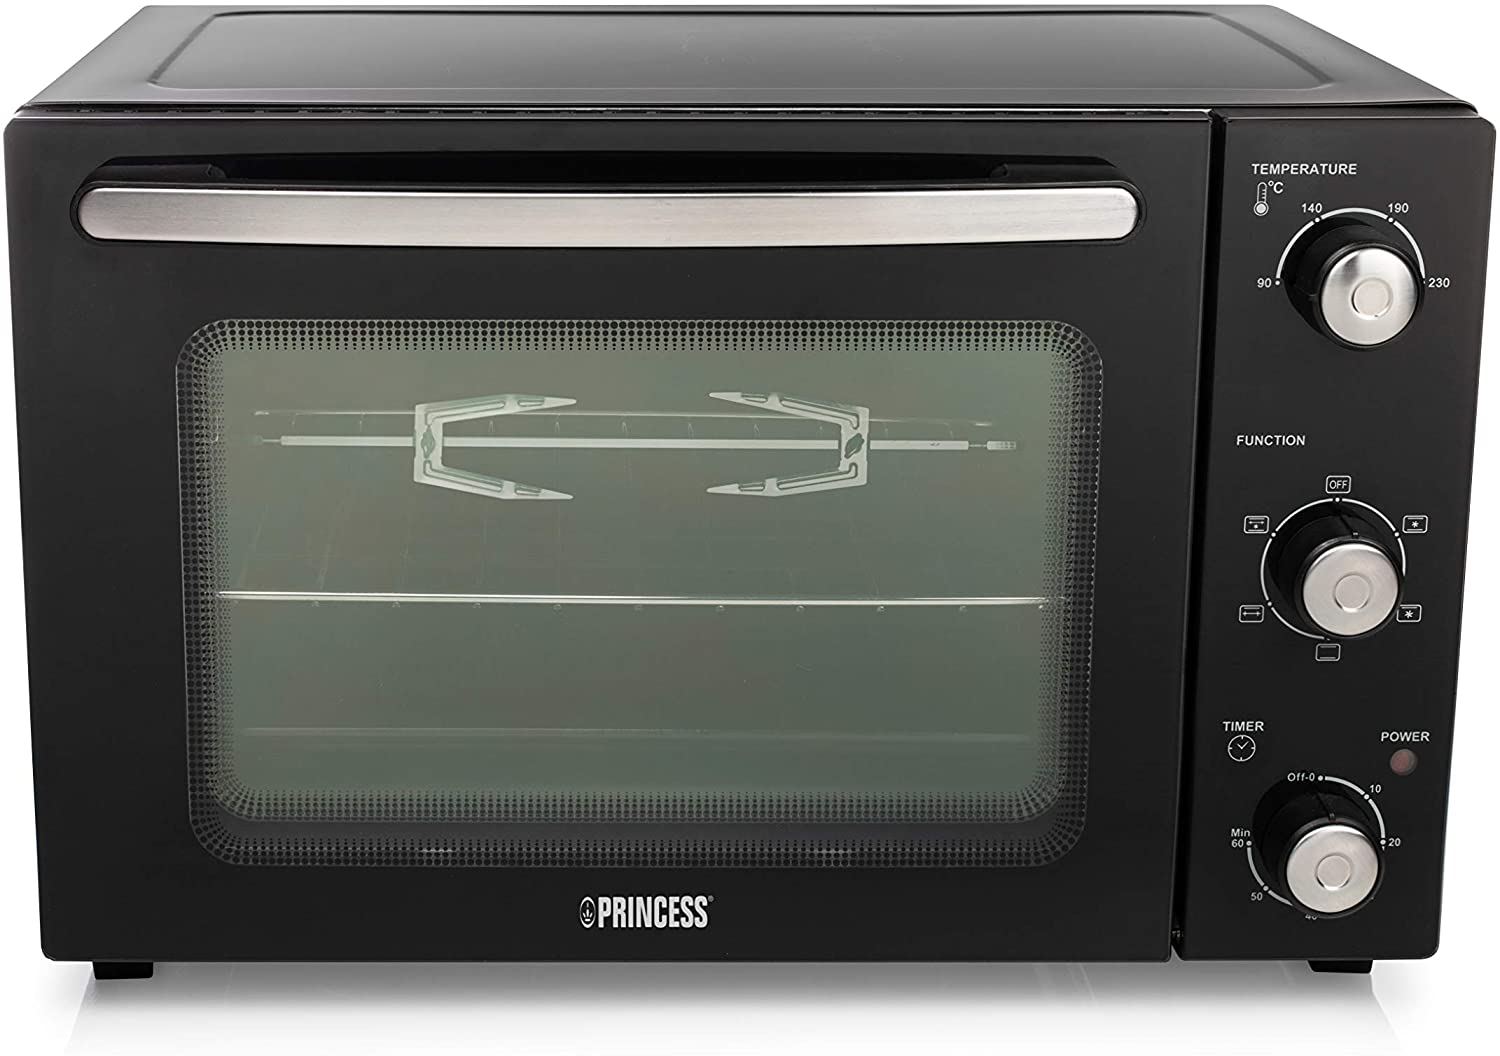 Princess 01.112751.01.001 DeLuxe 112751 Convection Oven - 32 Litre Capacity Interior Walls with Self-Cleaning Coating Black and Silver